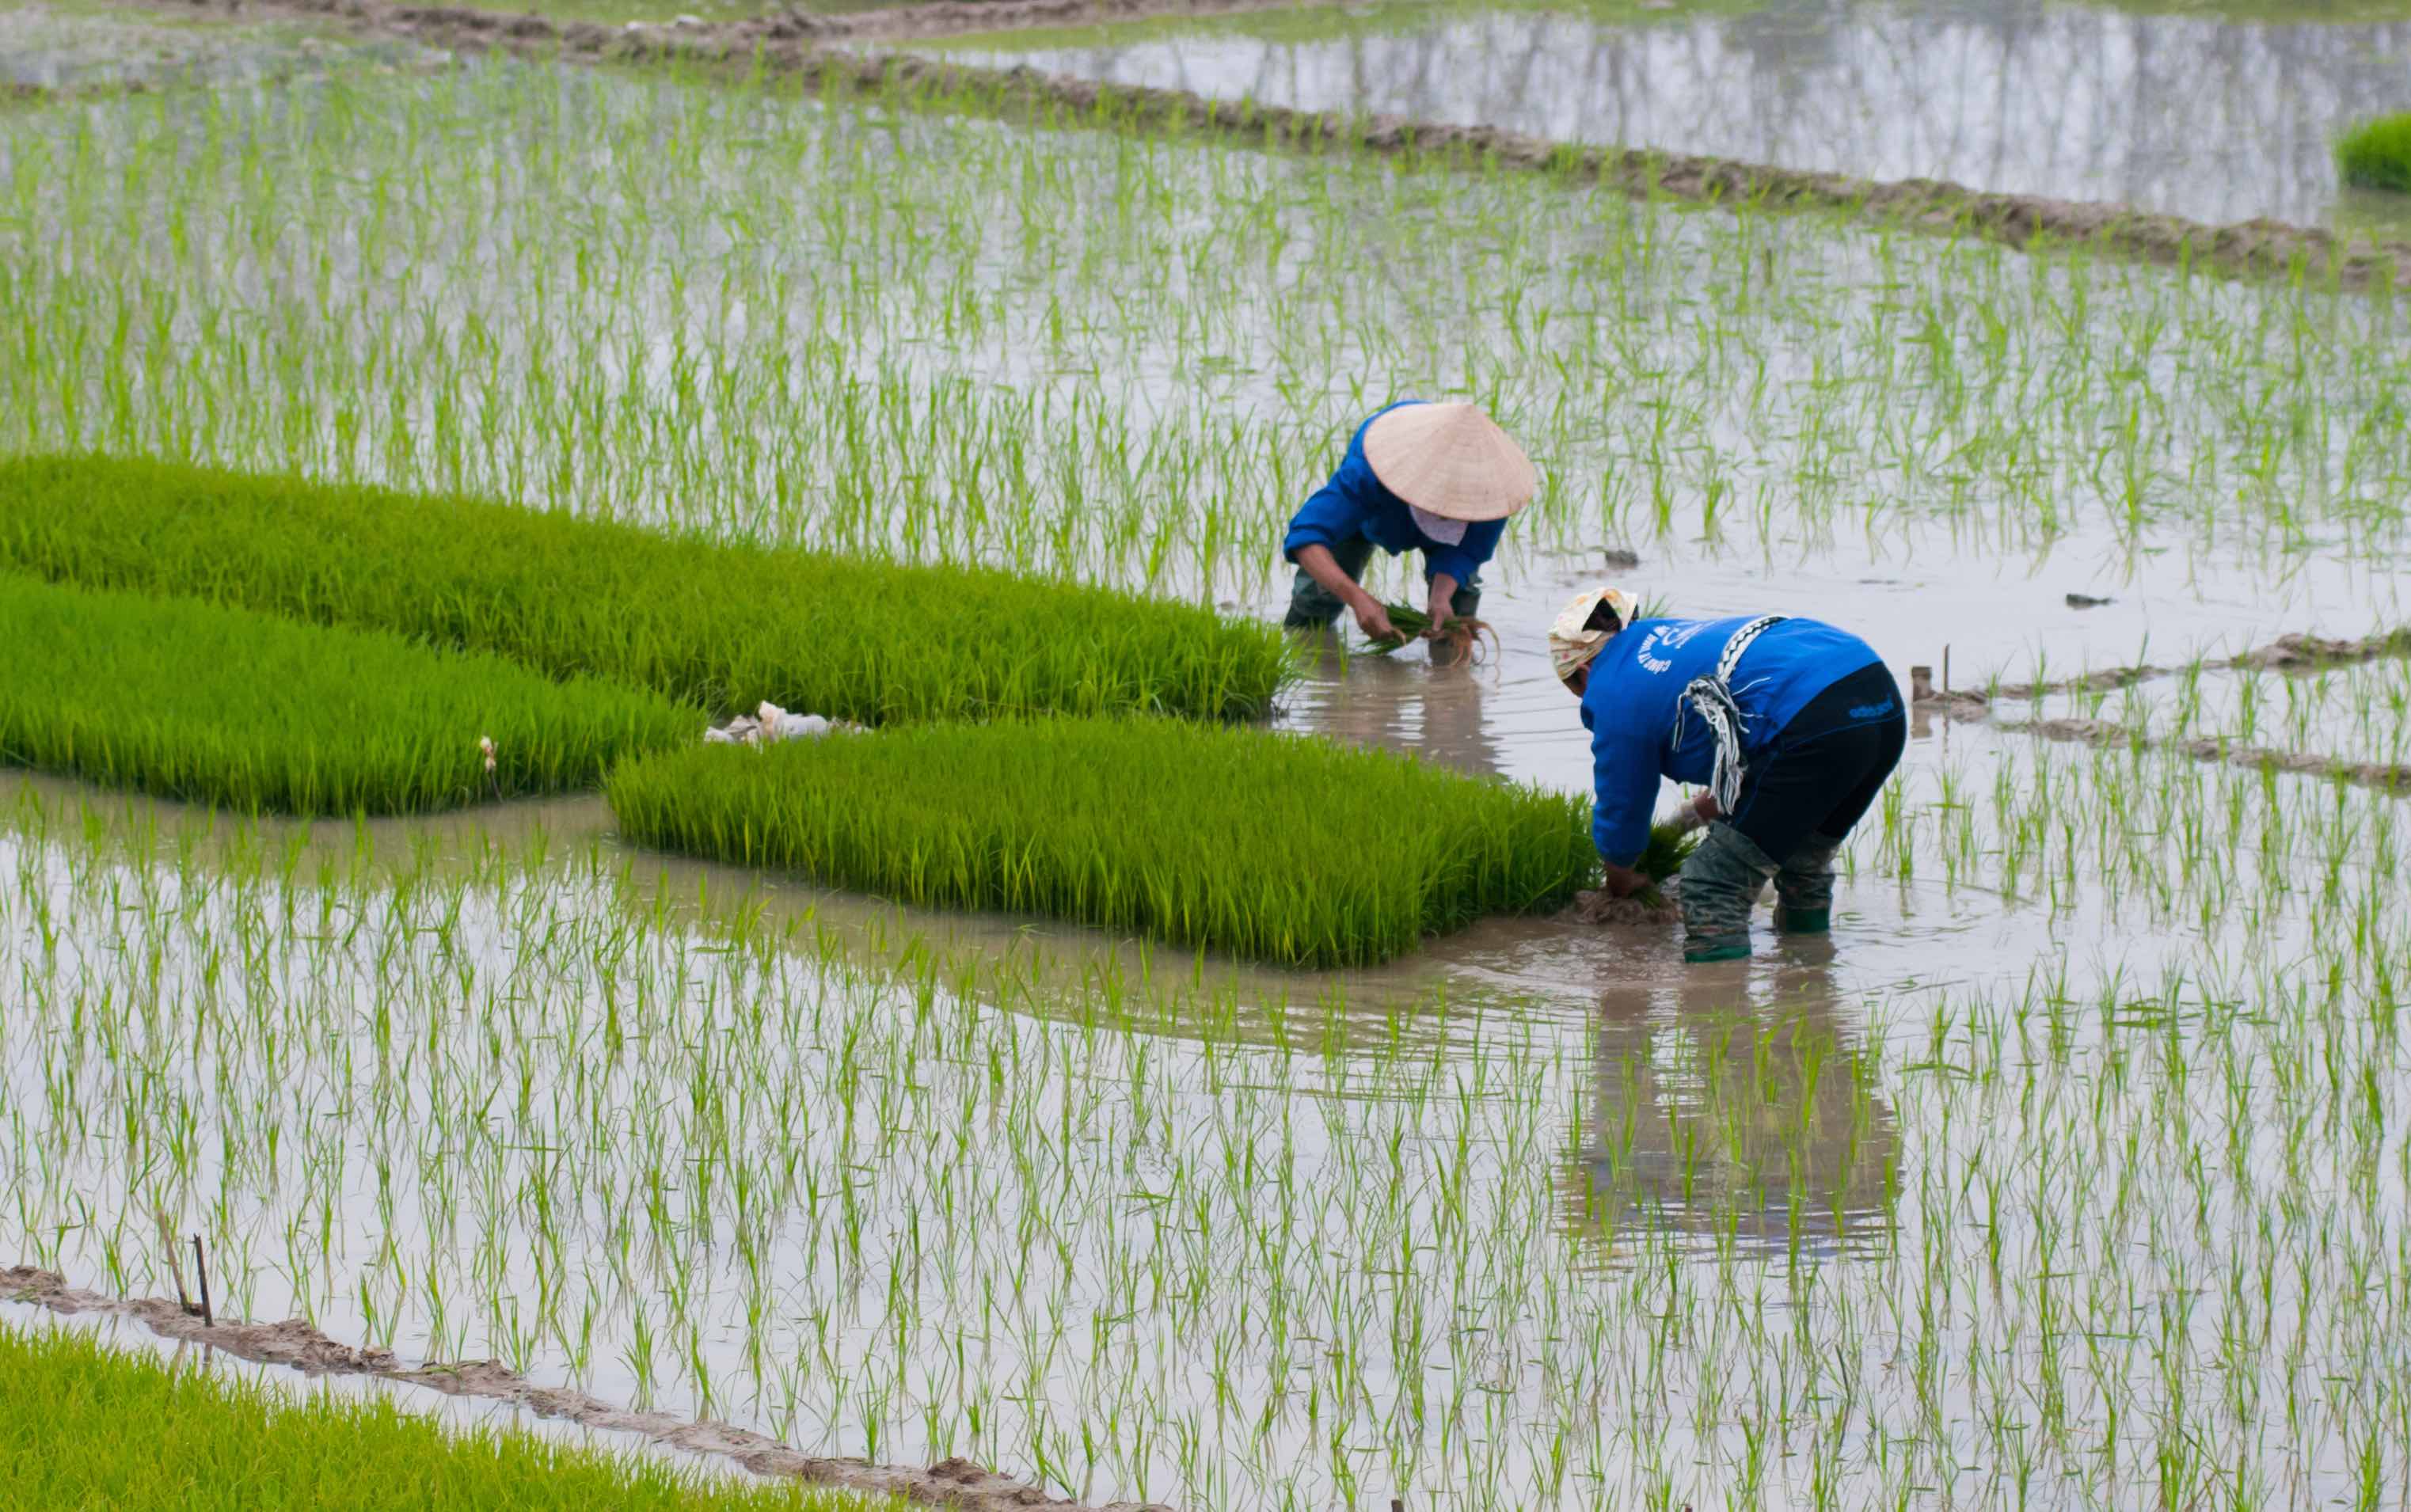 Two farmers work in a rice paddy